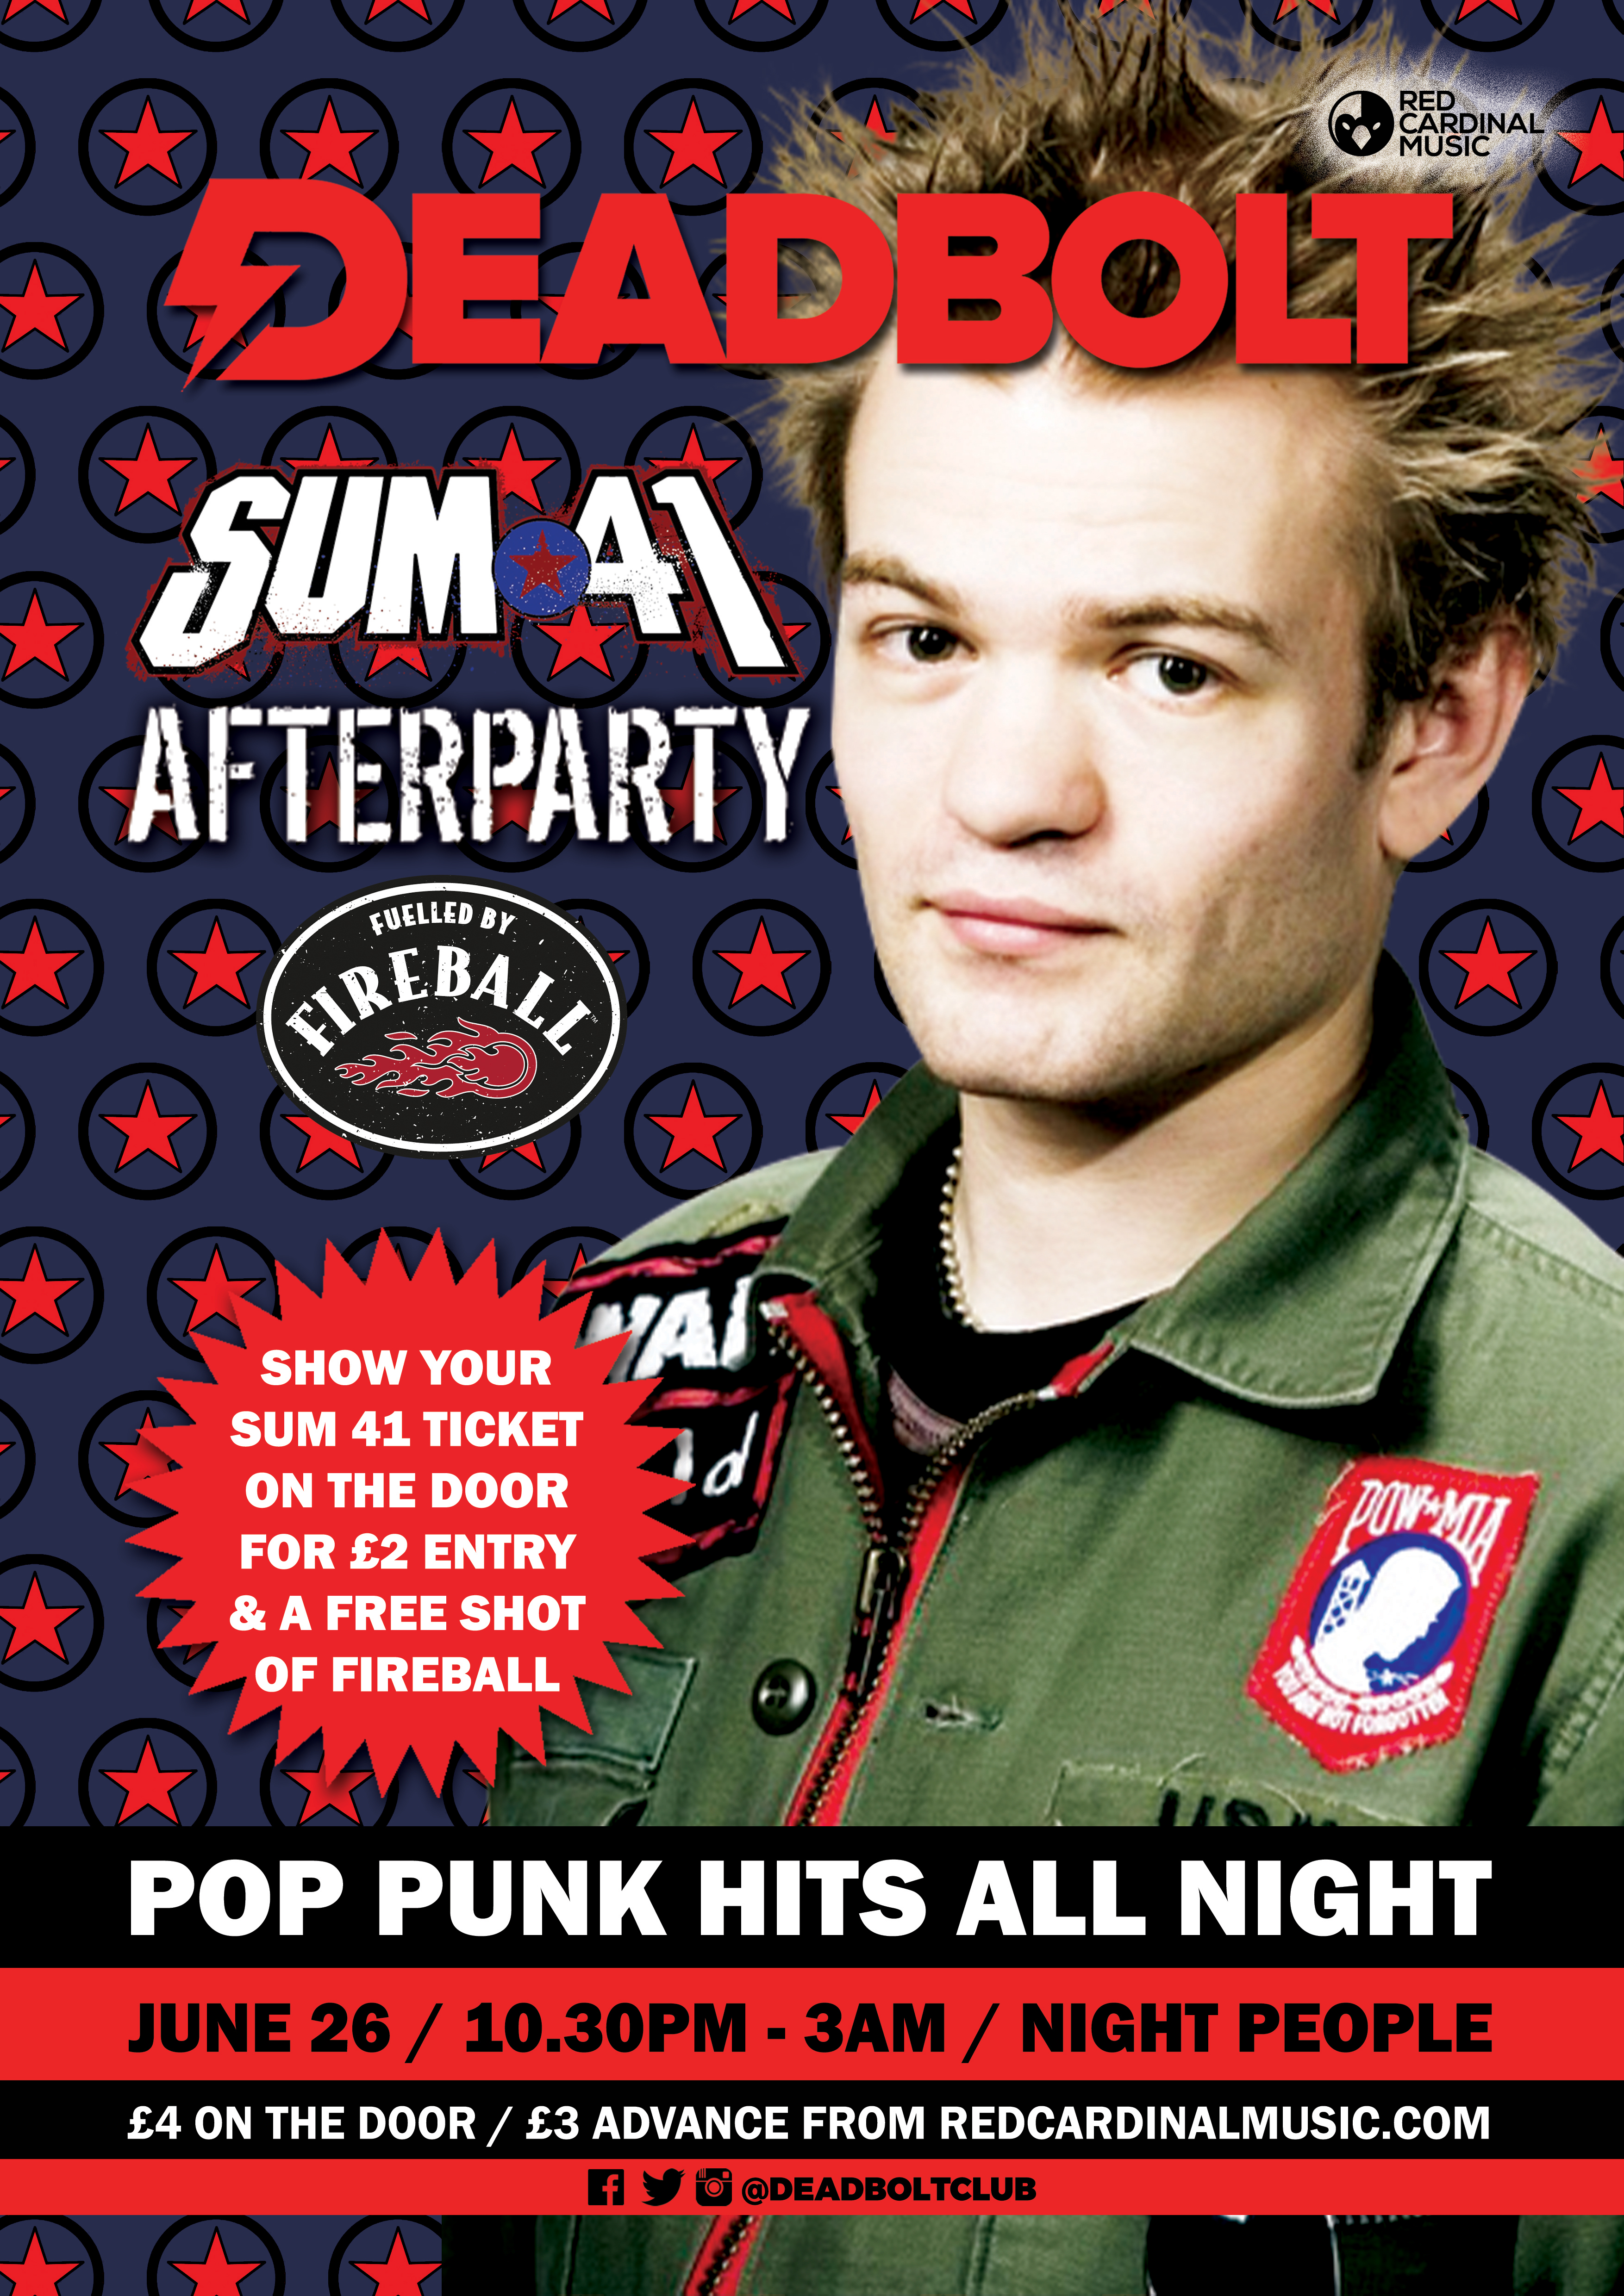 Deadbolt Manchester - Sum 41 After Party - Night People - 26 Jun 19 - RGB For Web